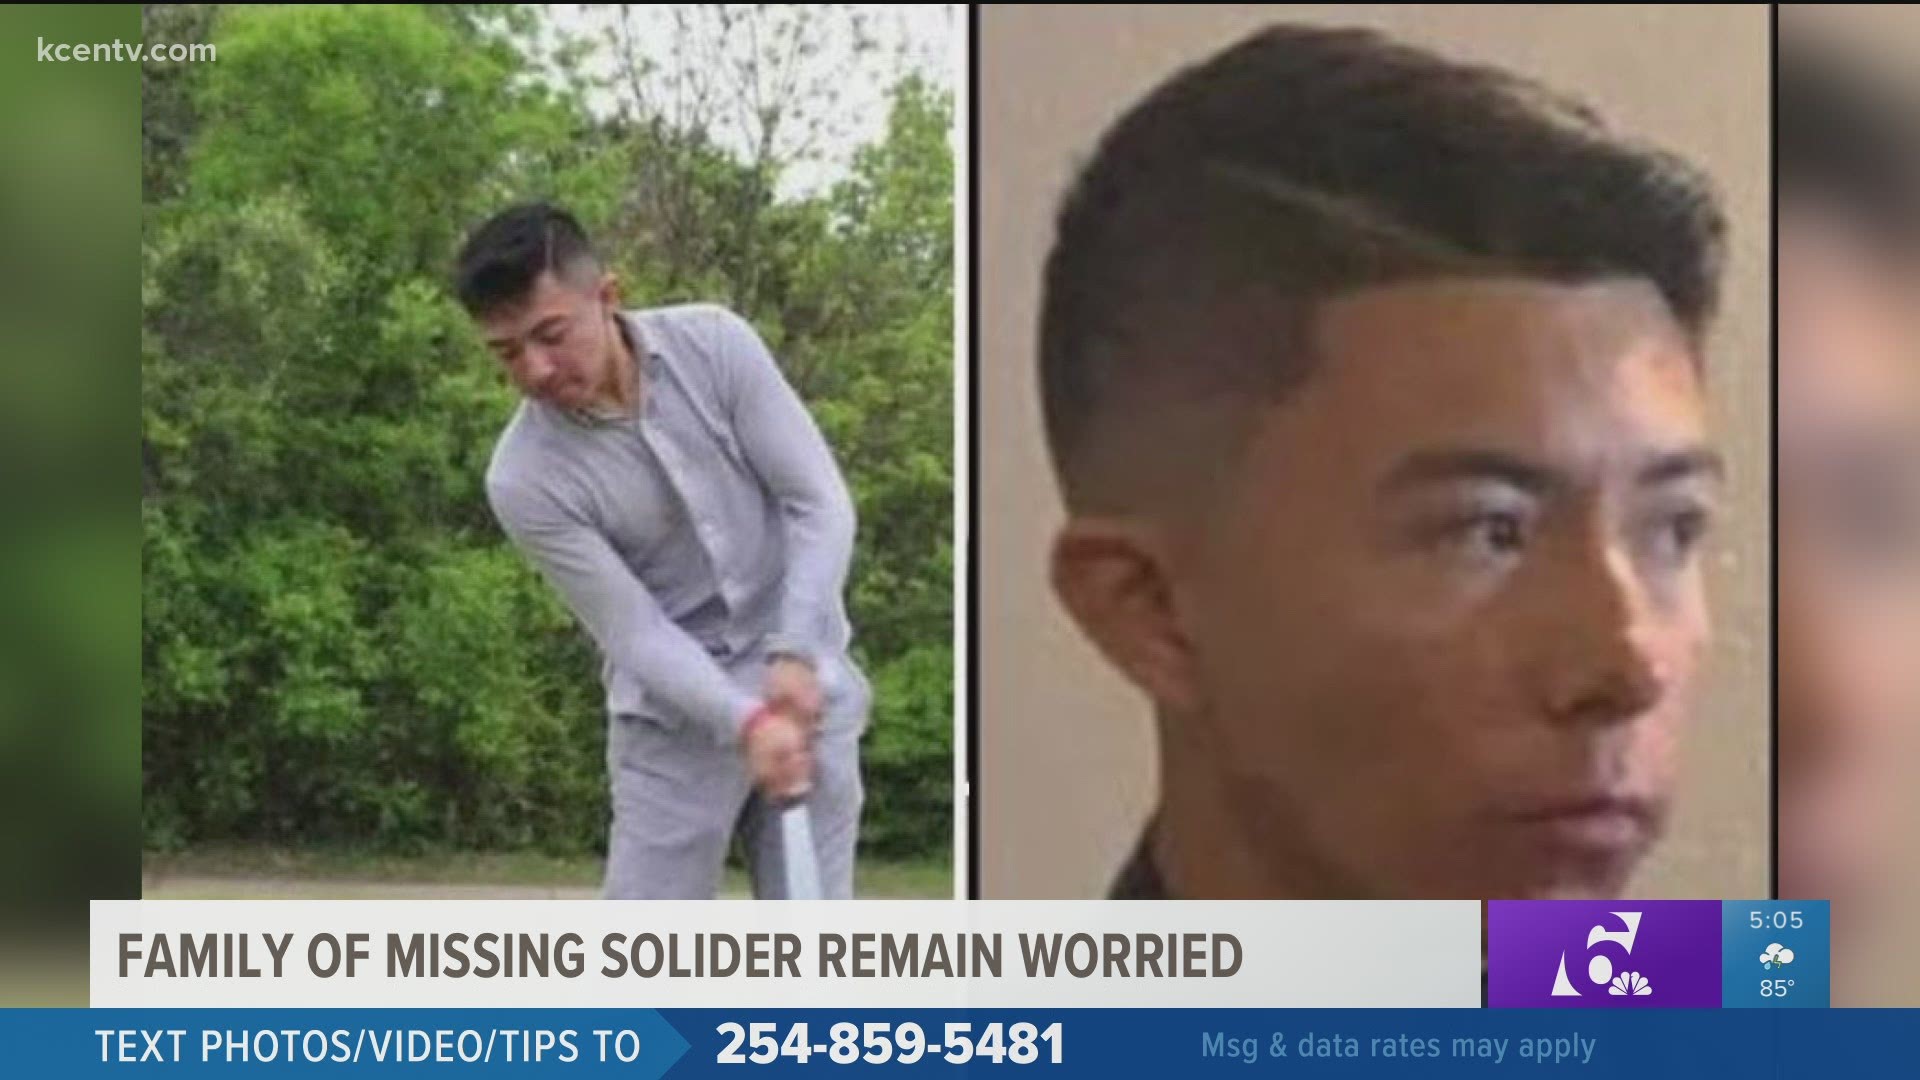 Spc. Abram Salas II was reported missing this past week after he failed to show up to work, according to the military post.